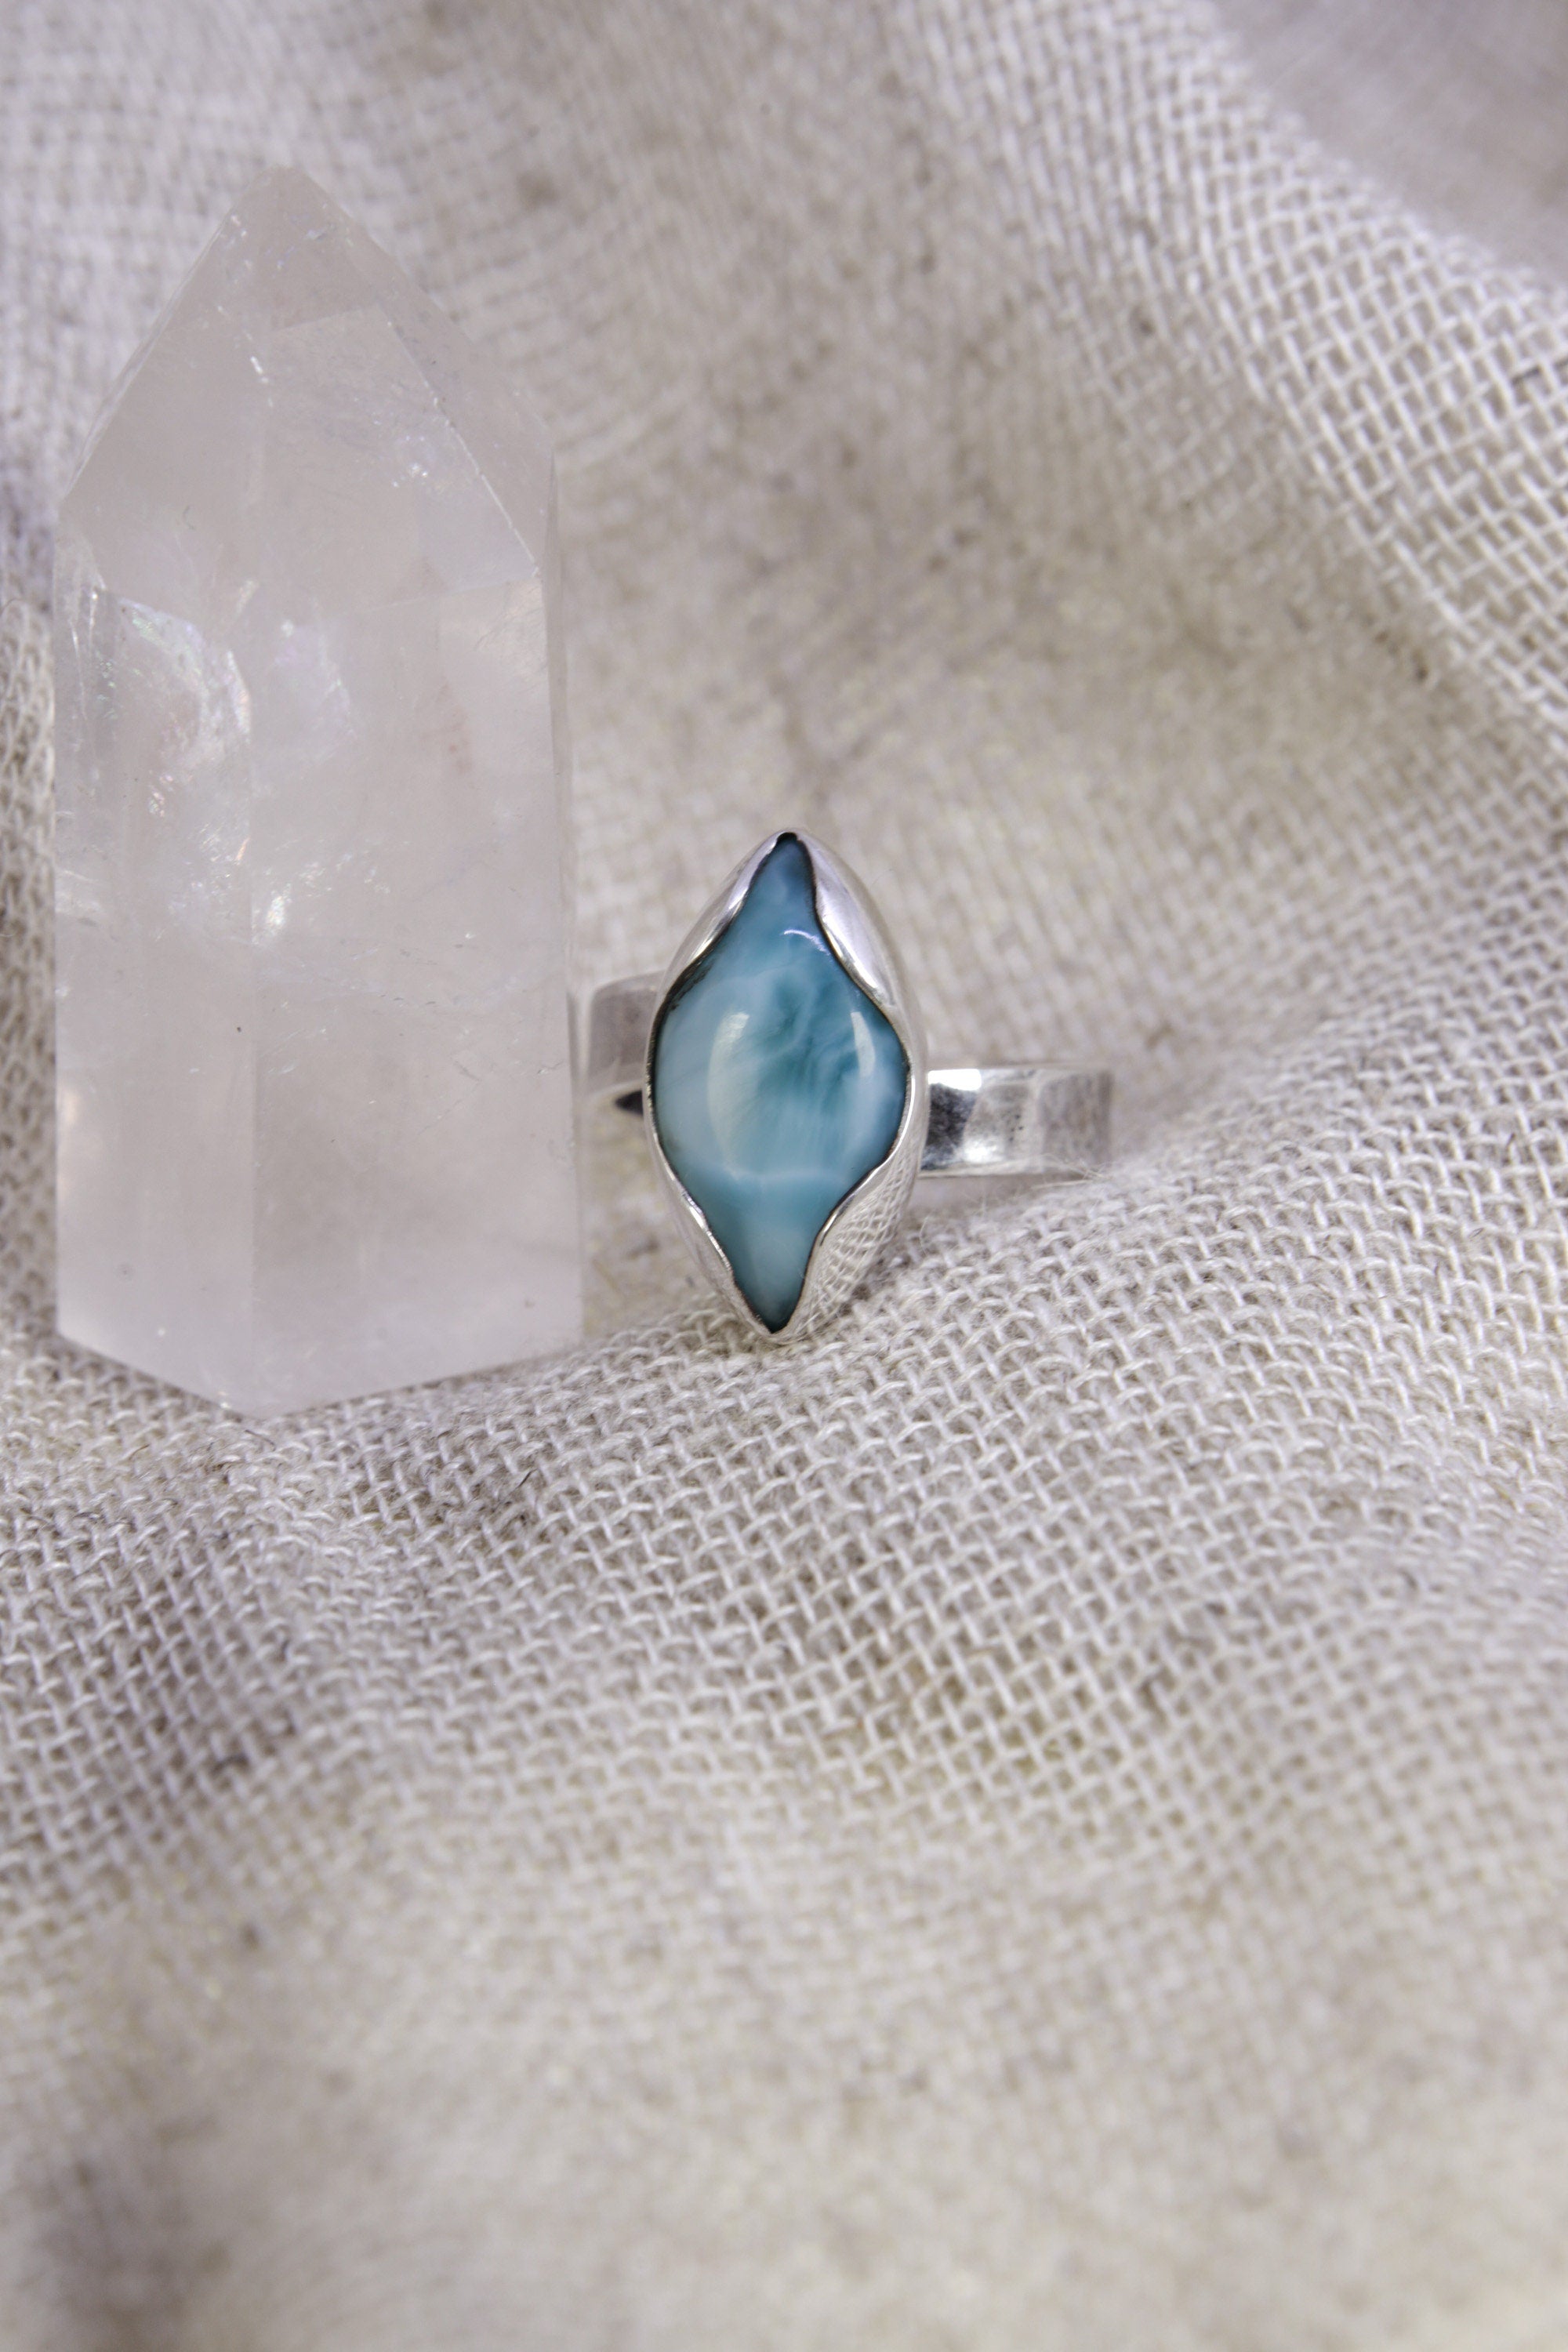 Vision of Serenity: Adjustable Sterling Silver Ring with Eye Shaped Larimar - Unisex - Size 5-12 US - NO/01